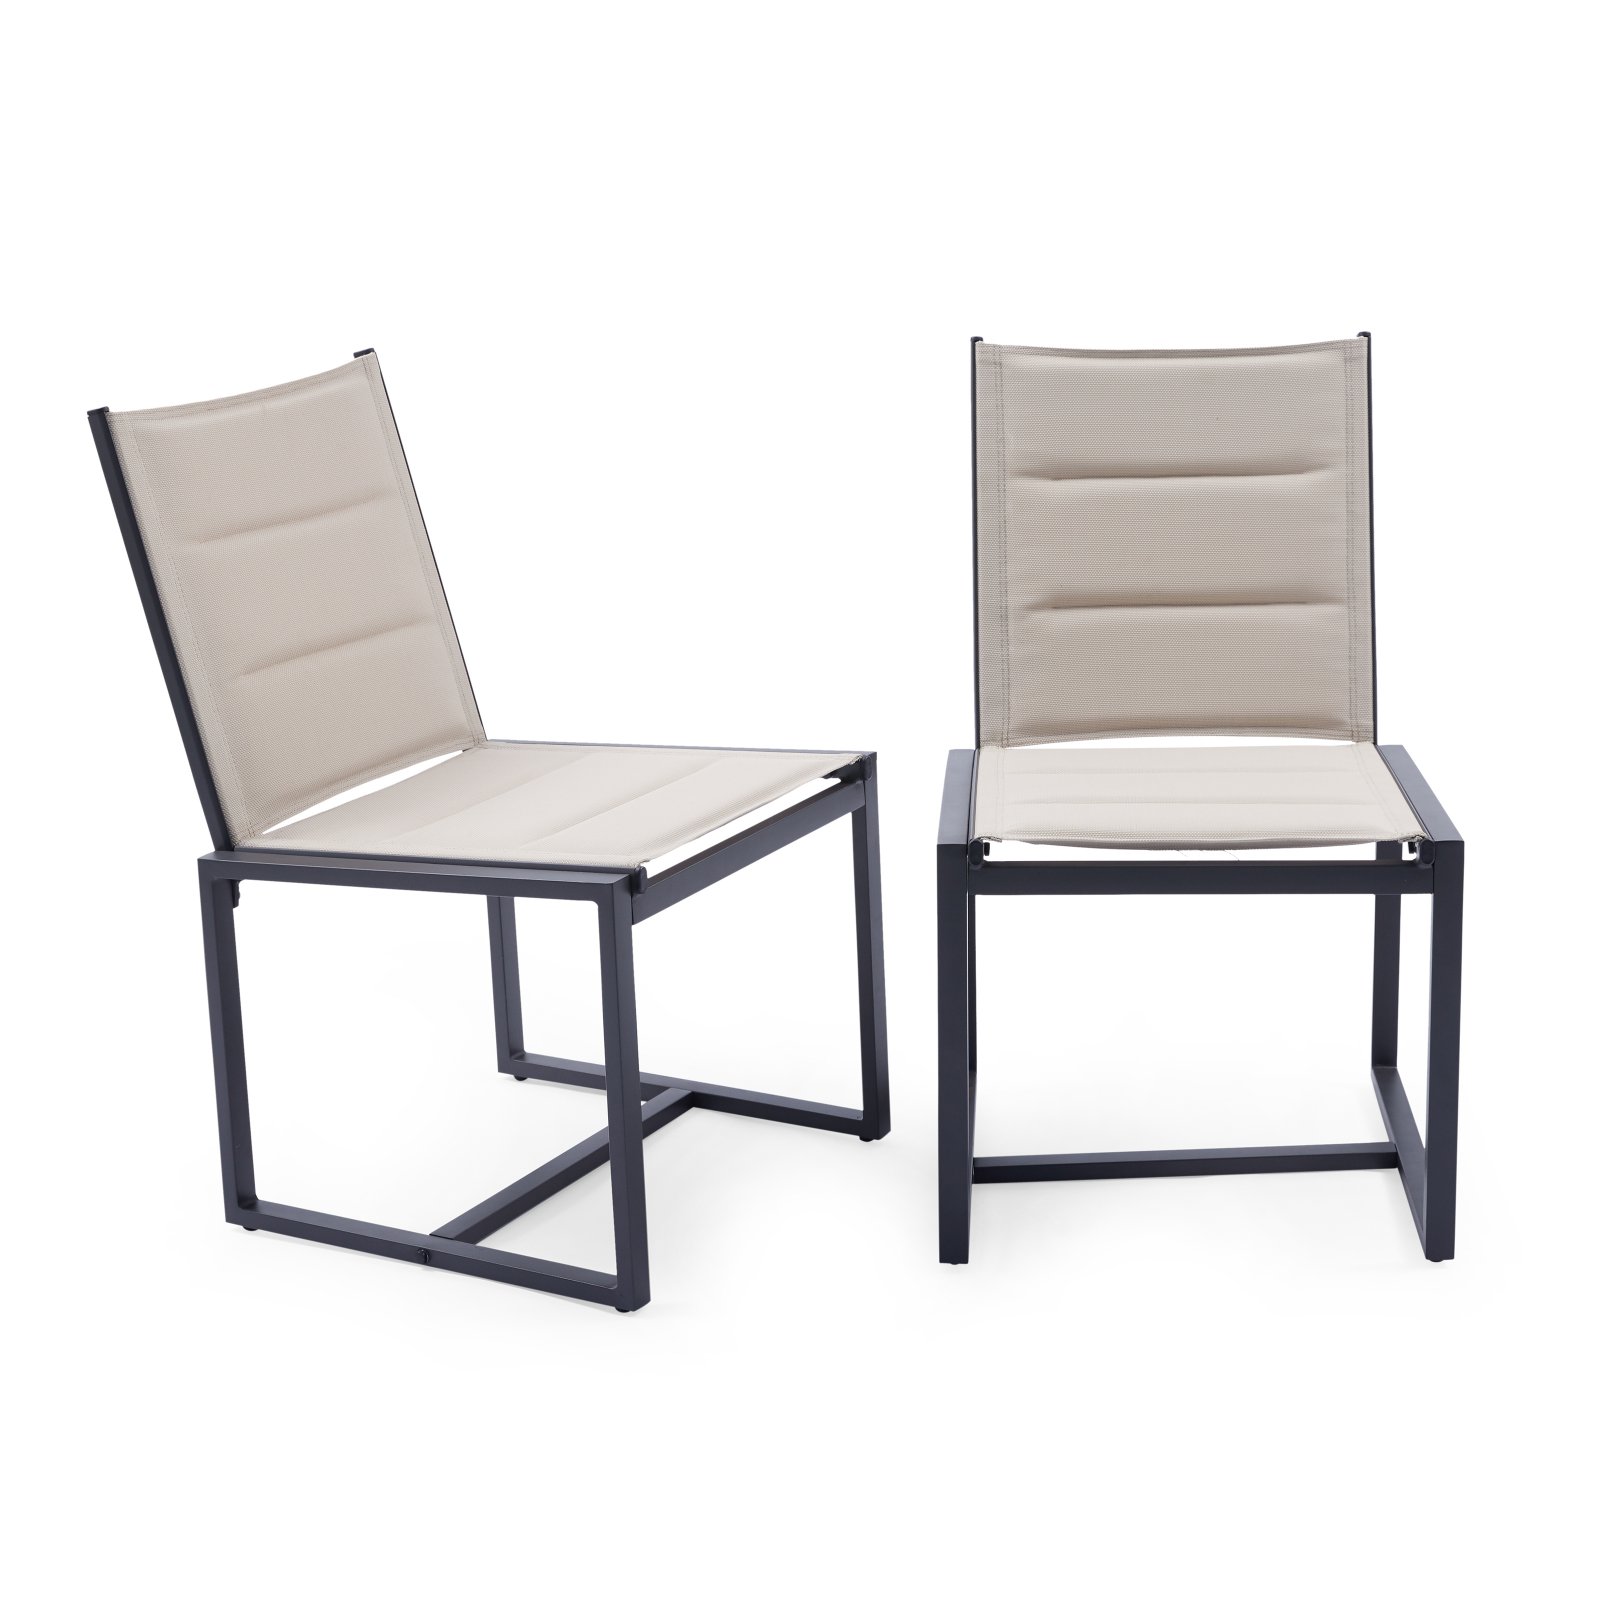 Outdoor Dining Chair Set HOT ONLINE Clearance!